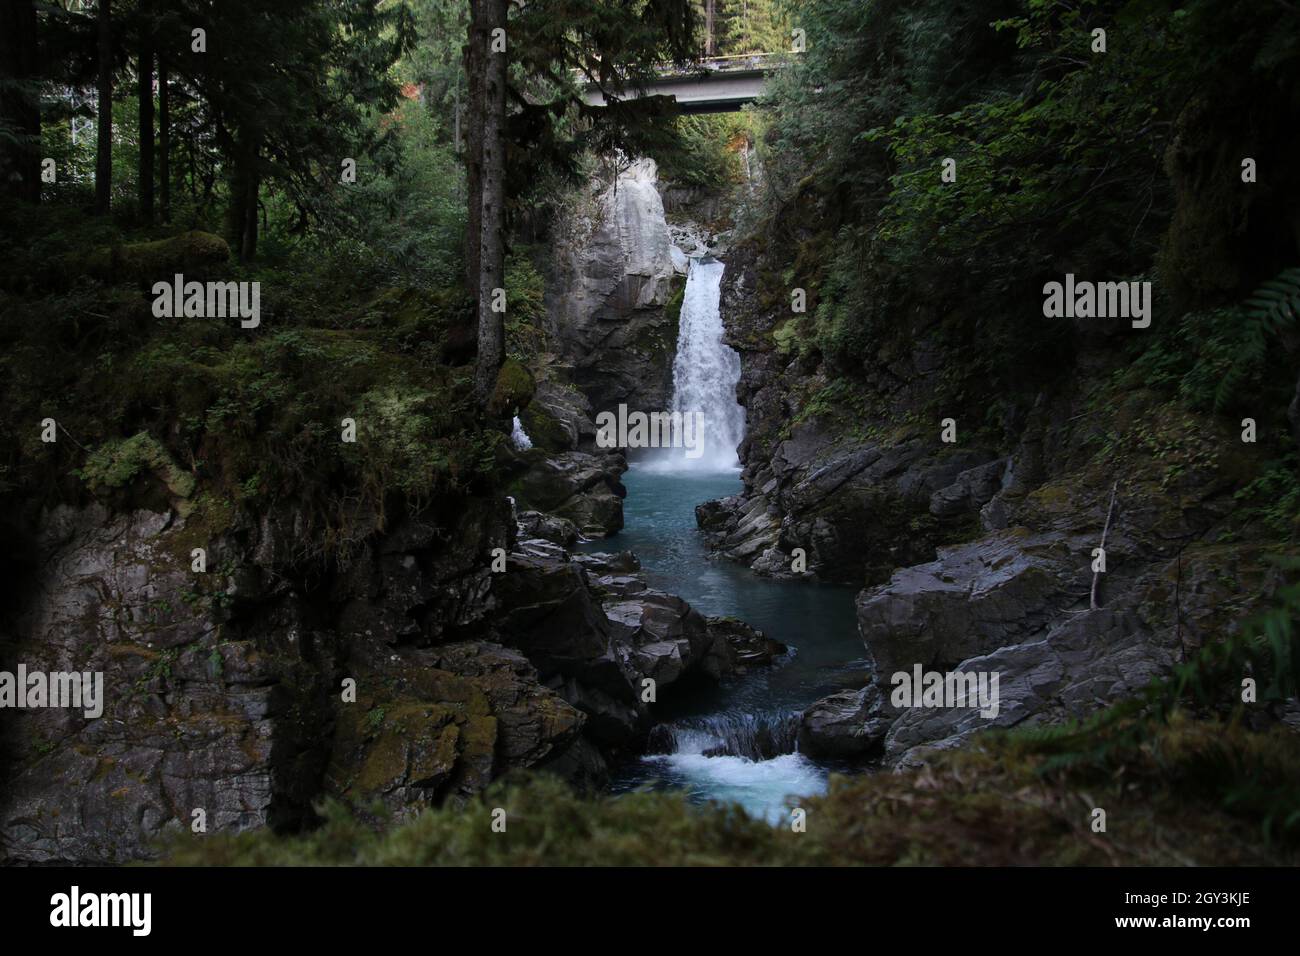 A waterfall flowing underneath a bridge flowing into a pool.  The river then flows between two rock walls. Stock Photo